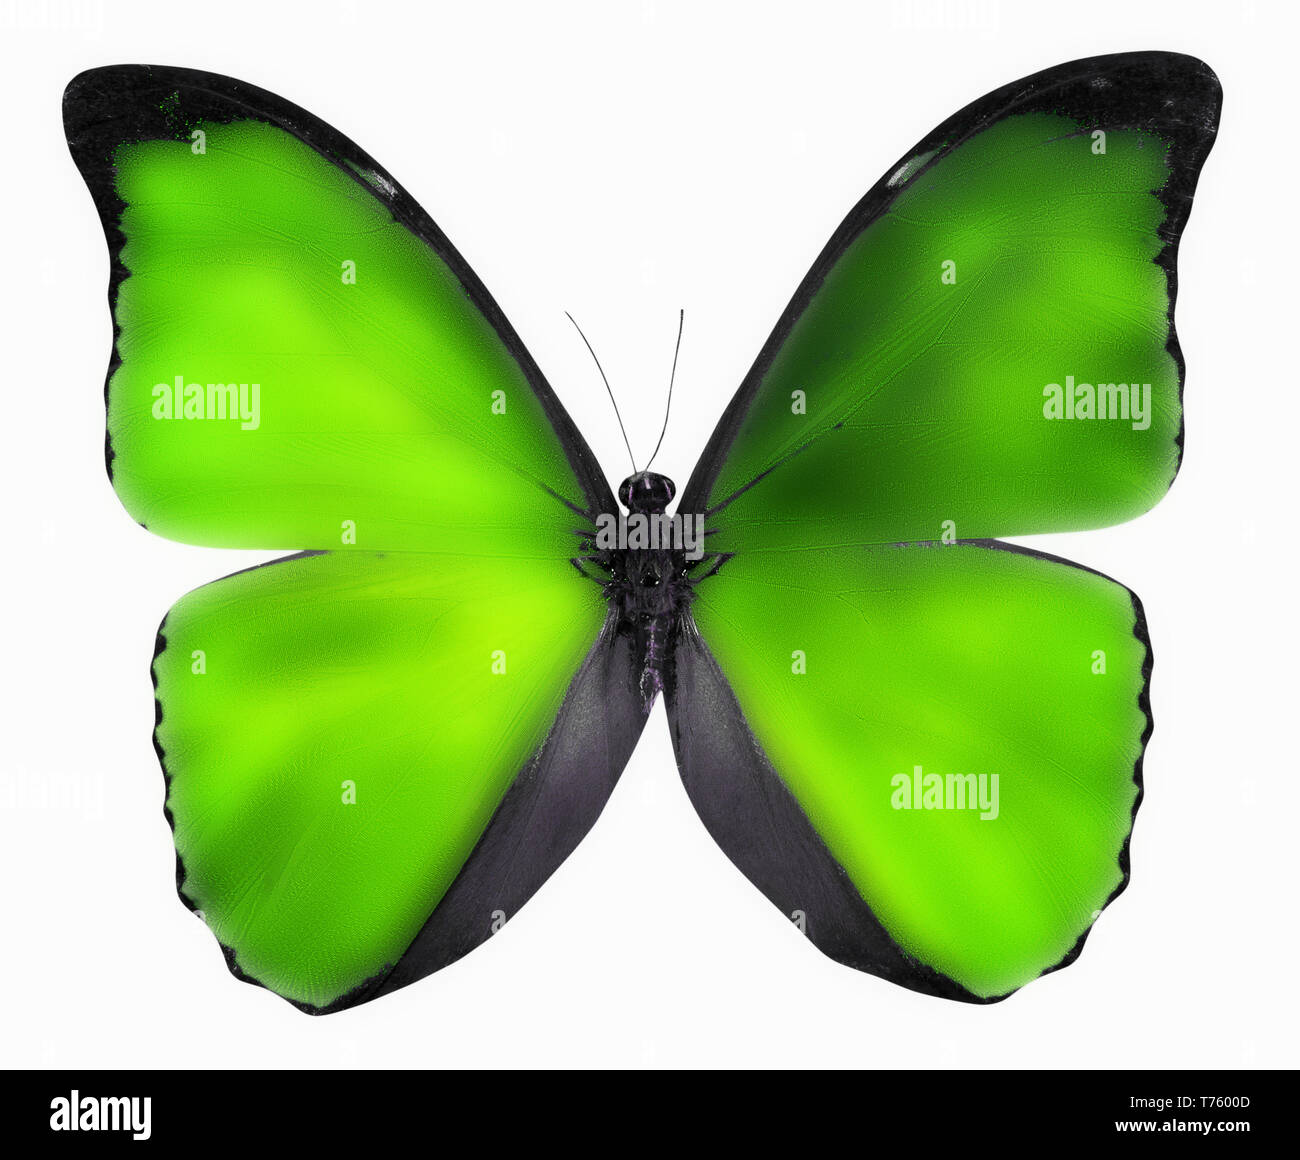 green butterfly isolated on a white background. Stock Photo